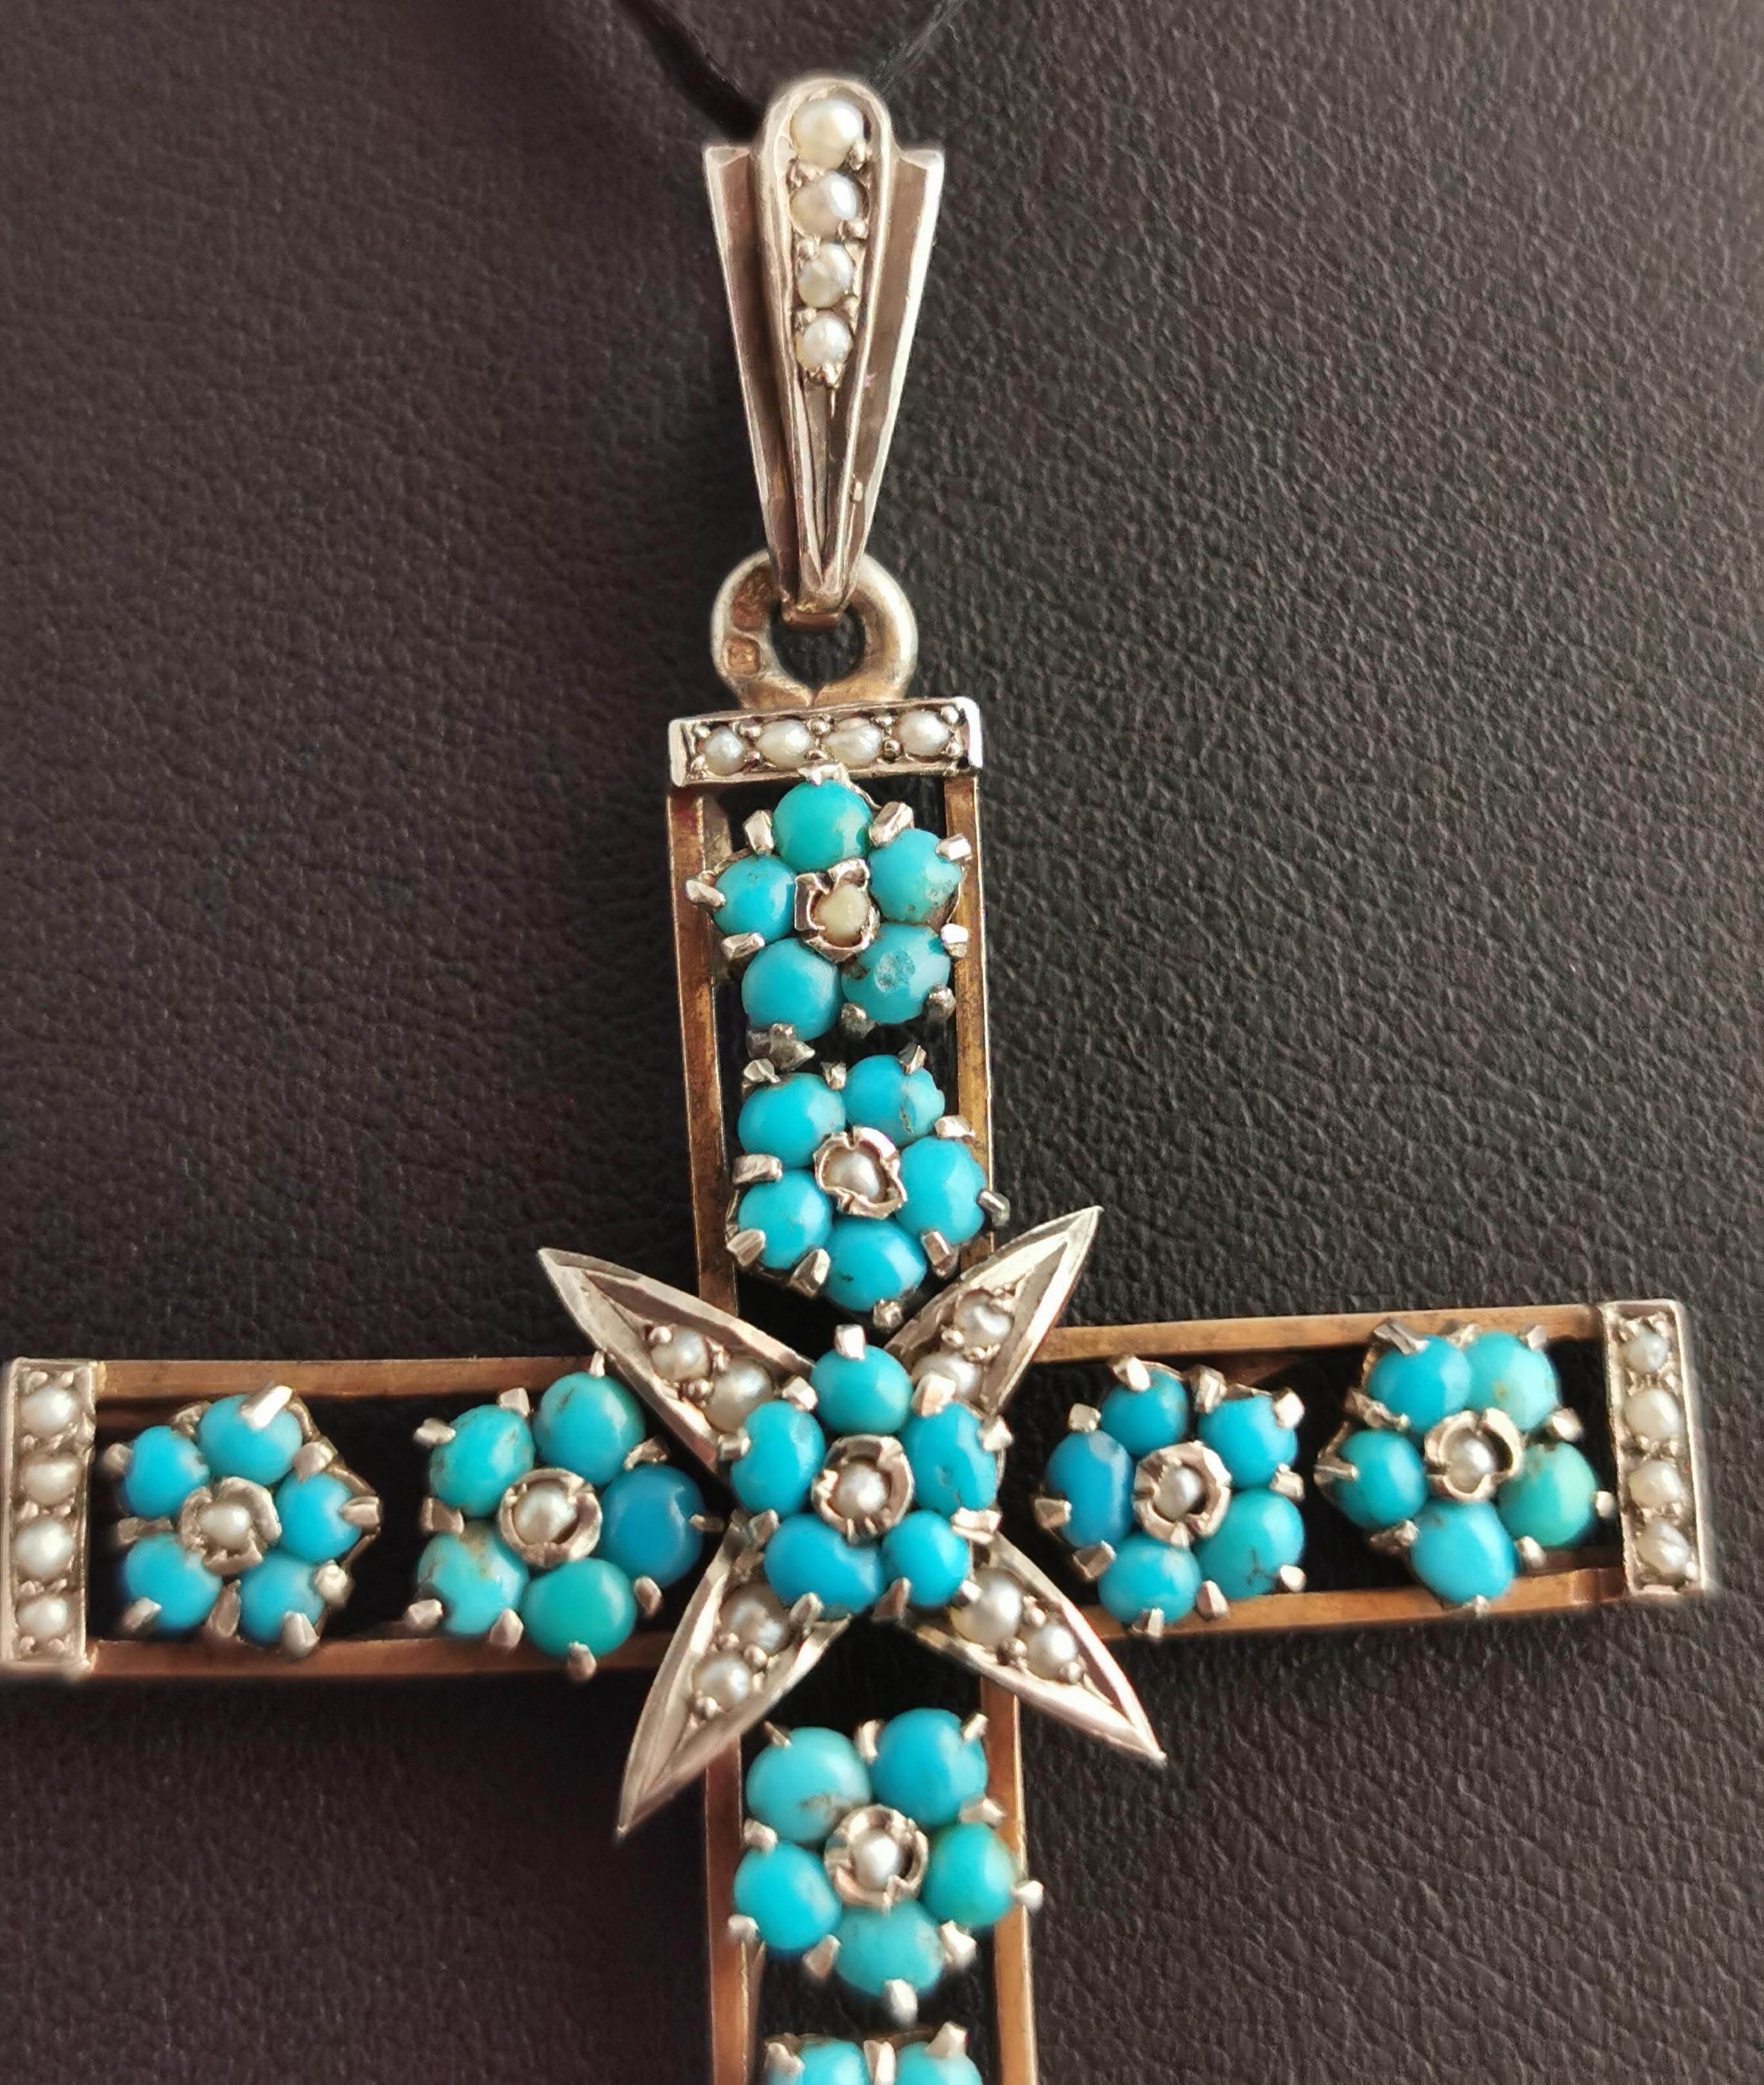 Women's Antique Austro Hungarian Cross Pendant, Turquoise and Seed Pearl, Silver